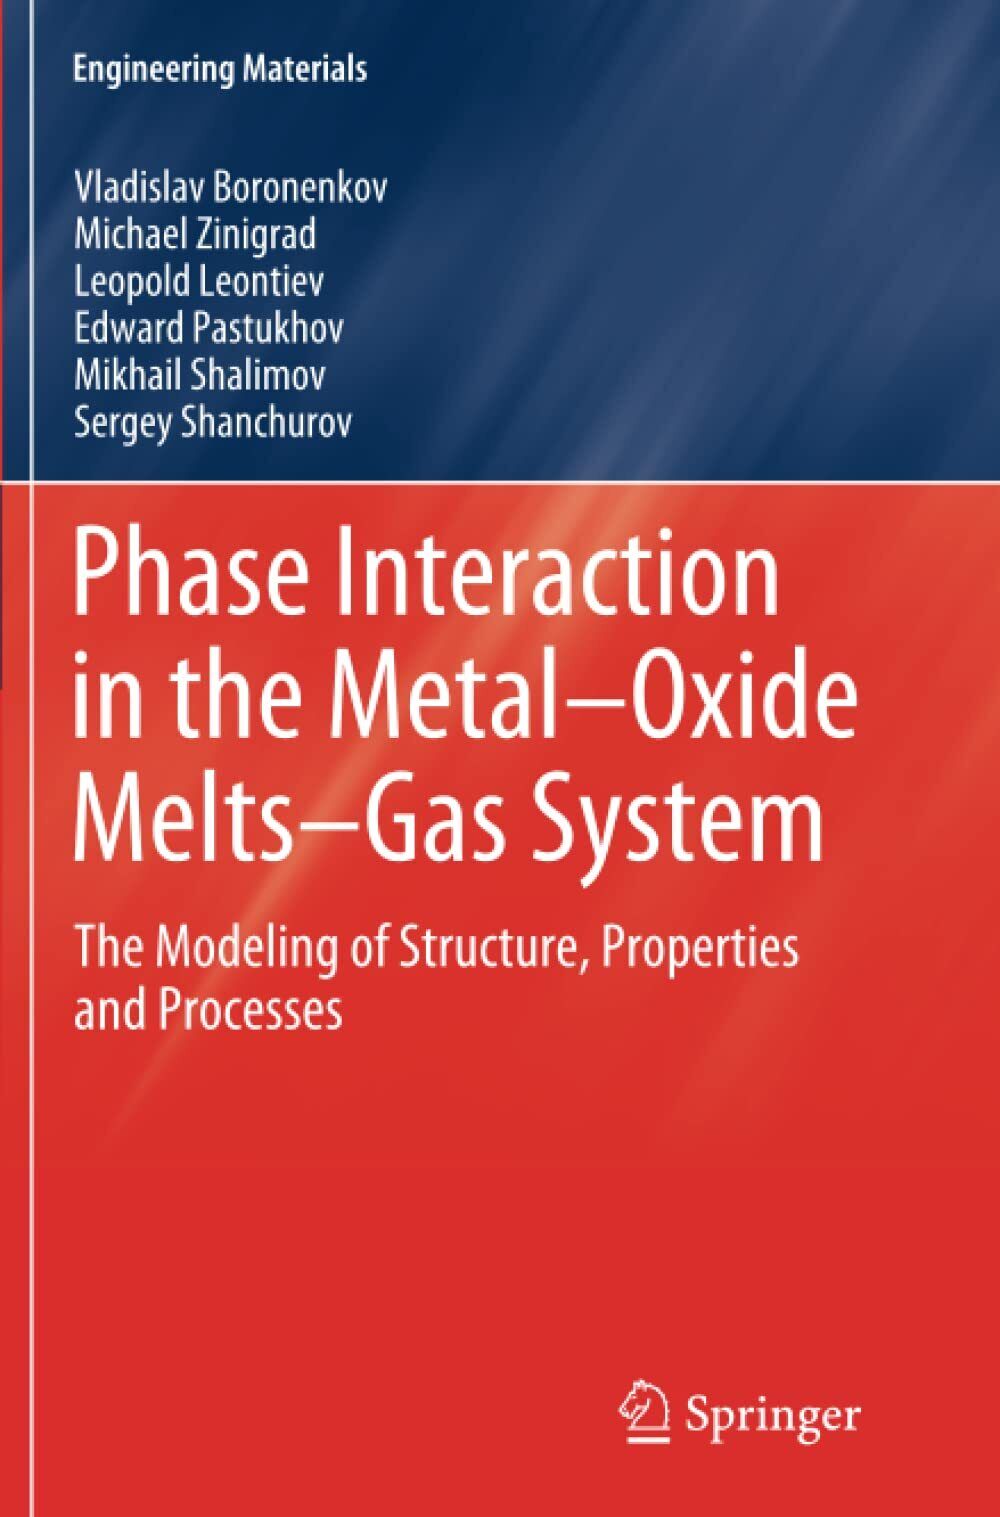 Phase Interaction in the Metal - Oxide Melts - Gas -System - Springer, 2013